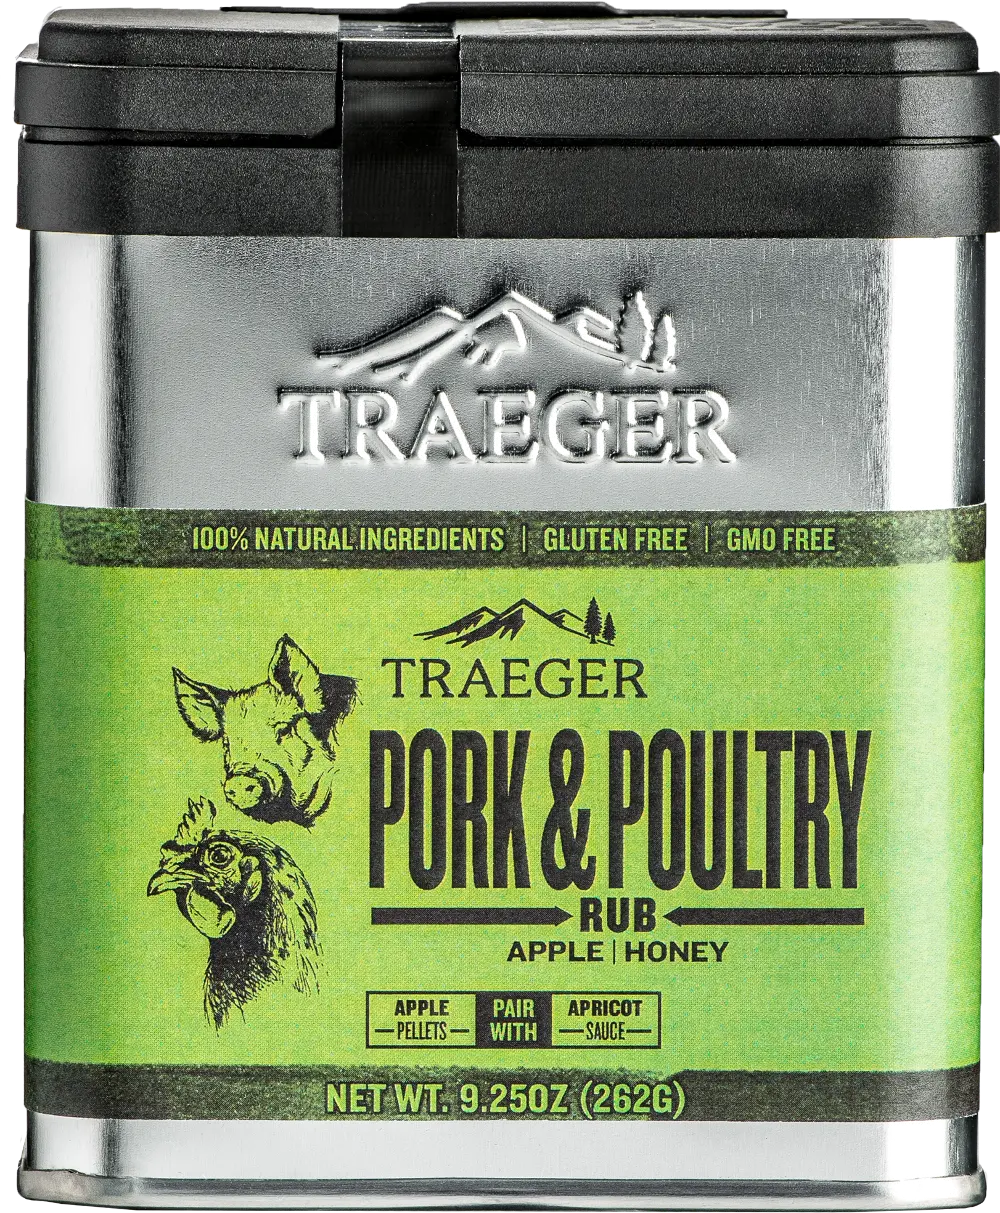 SPC171,PORK&POULTRY Traeger Grill Pork and Poultry Rub-1